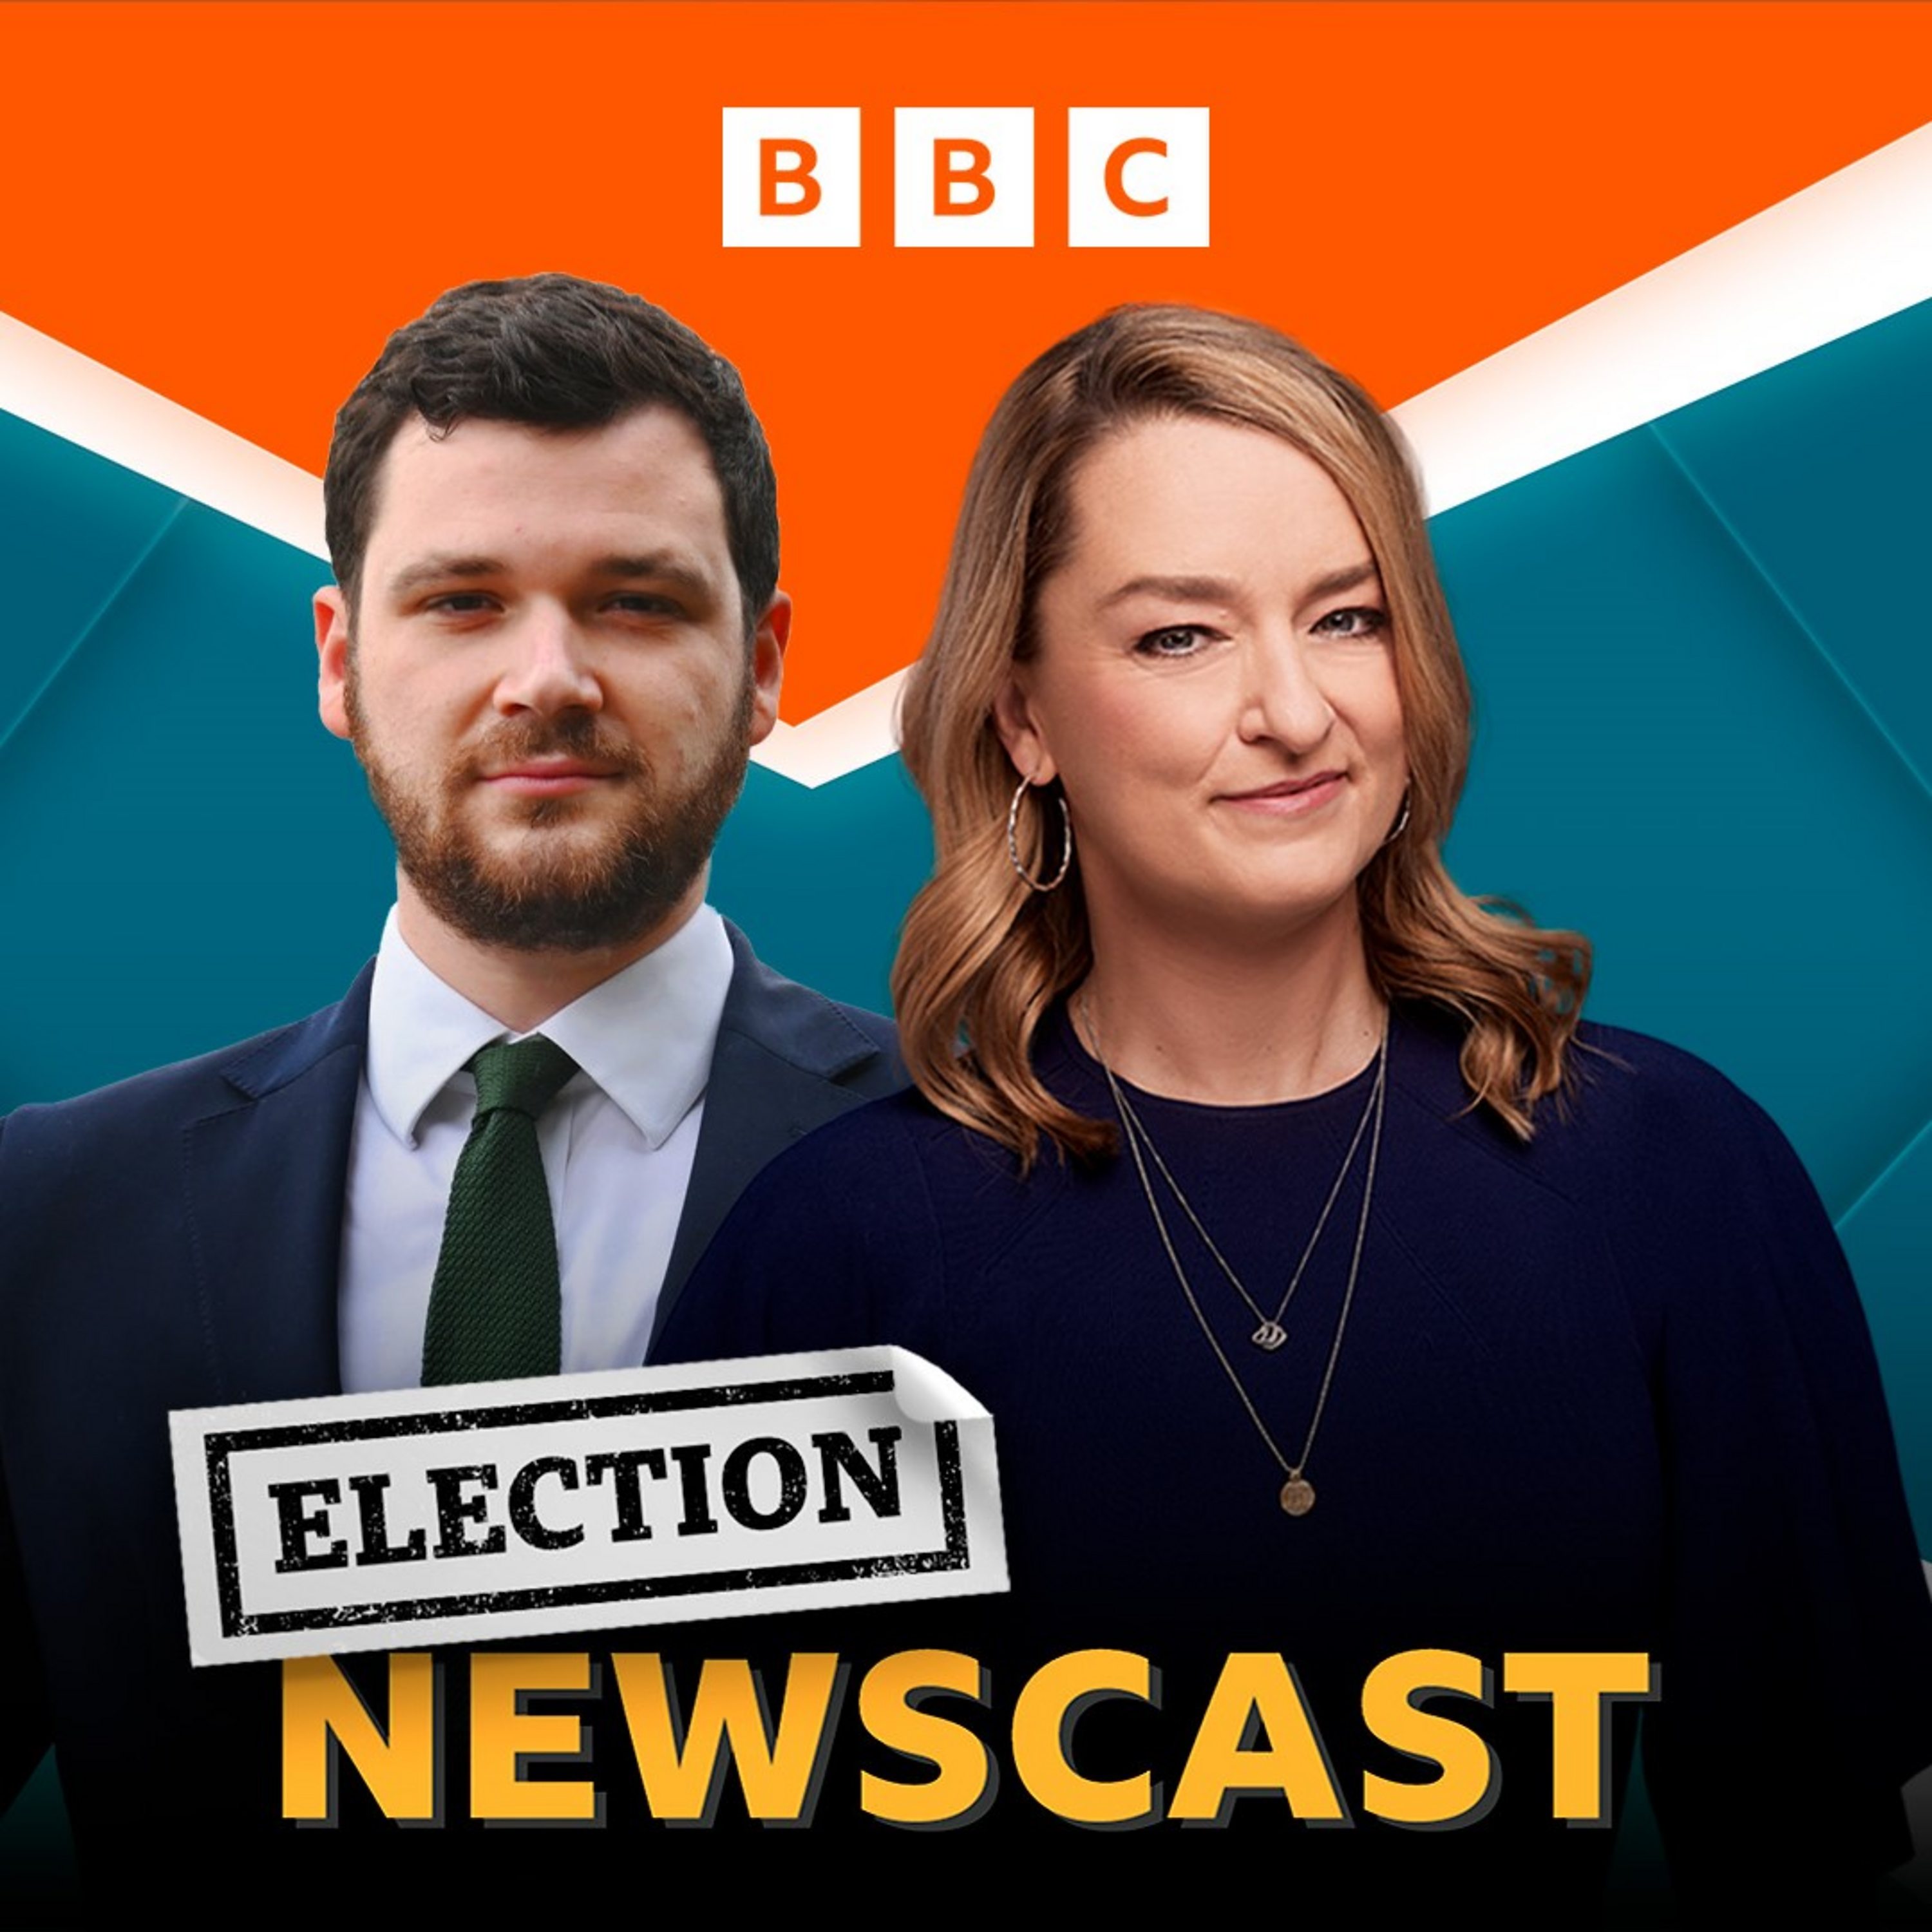 Electioncast: Read my lips... Migration and the NHS back on the agenda